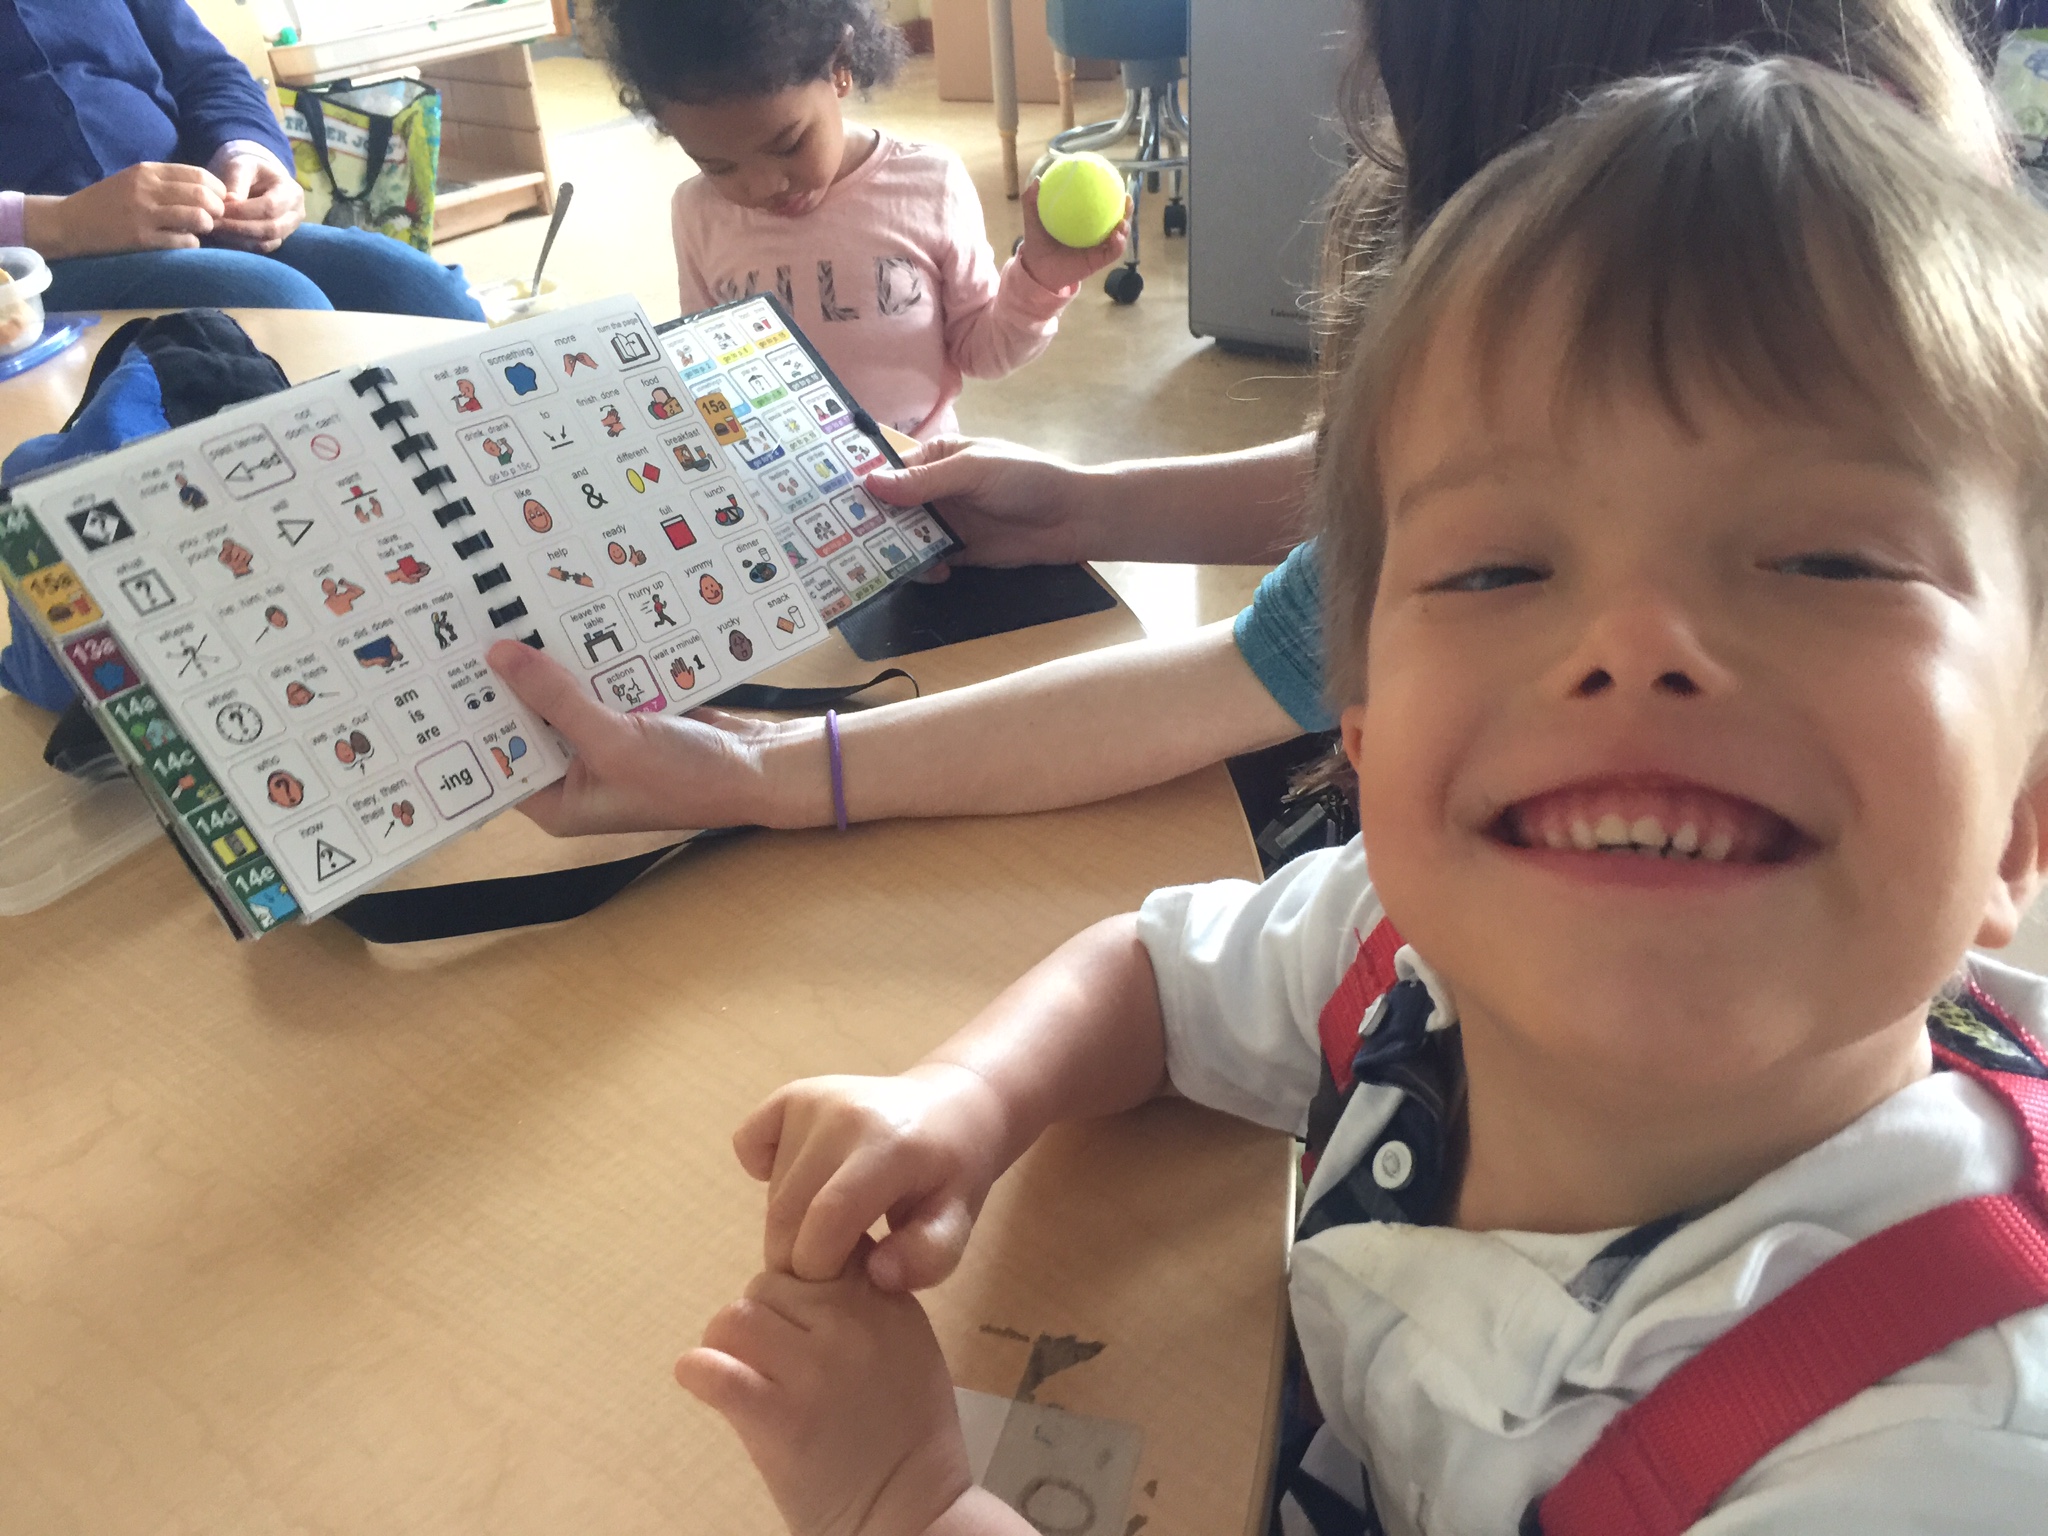 Milo Lorentzen is learning to read and speak using an alternative language method that incorporates symbols and pictures. He now reads at or above grade level. “He was starting to have behavioral issues until we gave him this method,” says his mother, Karen Park. “Now Milo has a voice.” 